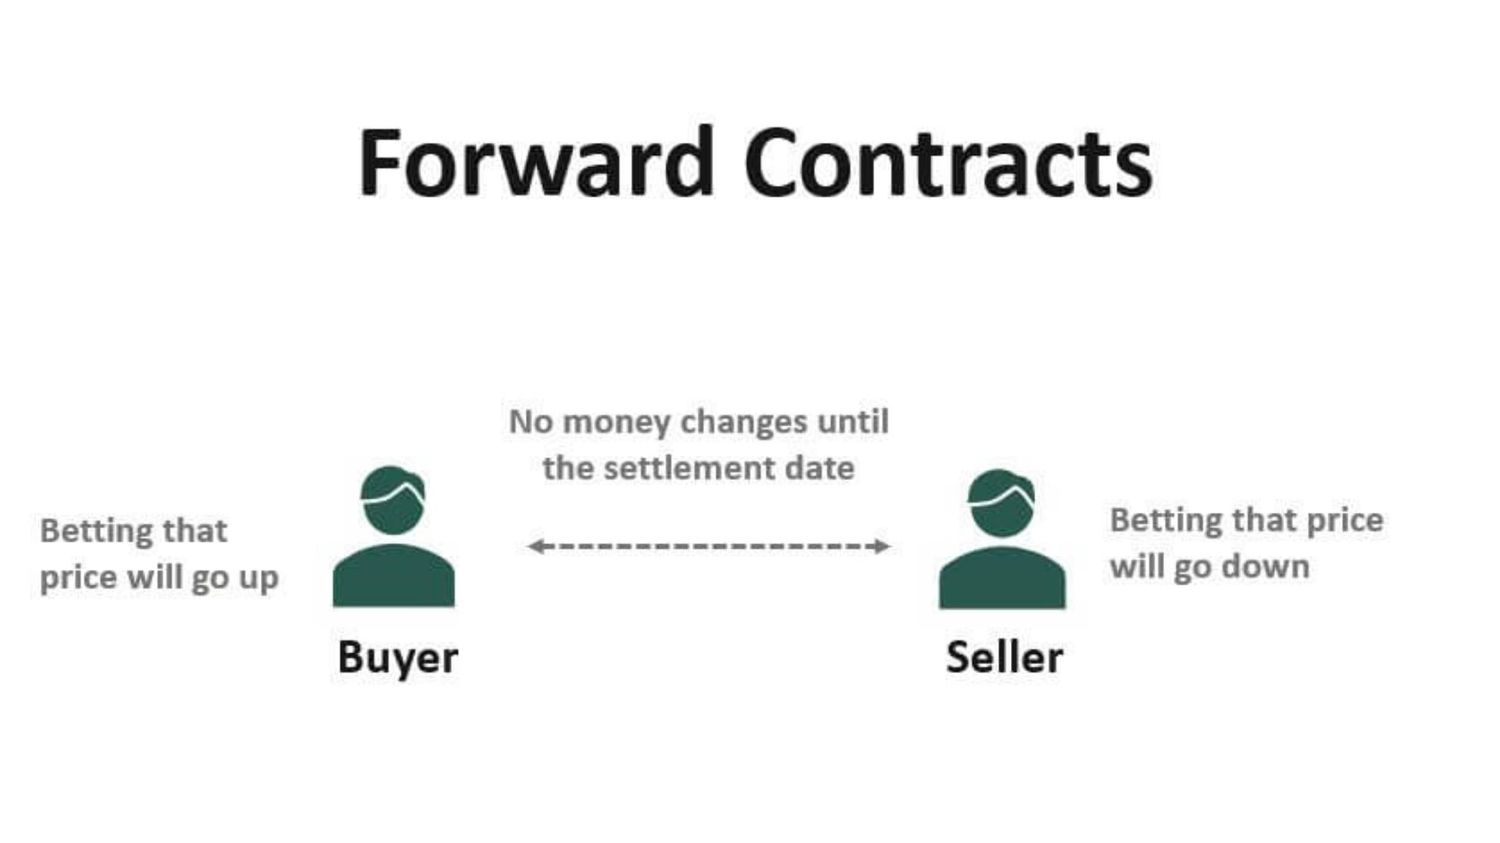 Hợp đồng kỳ hạn (Forwards Contracts)